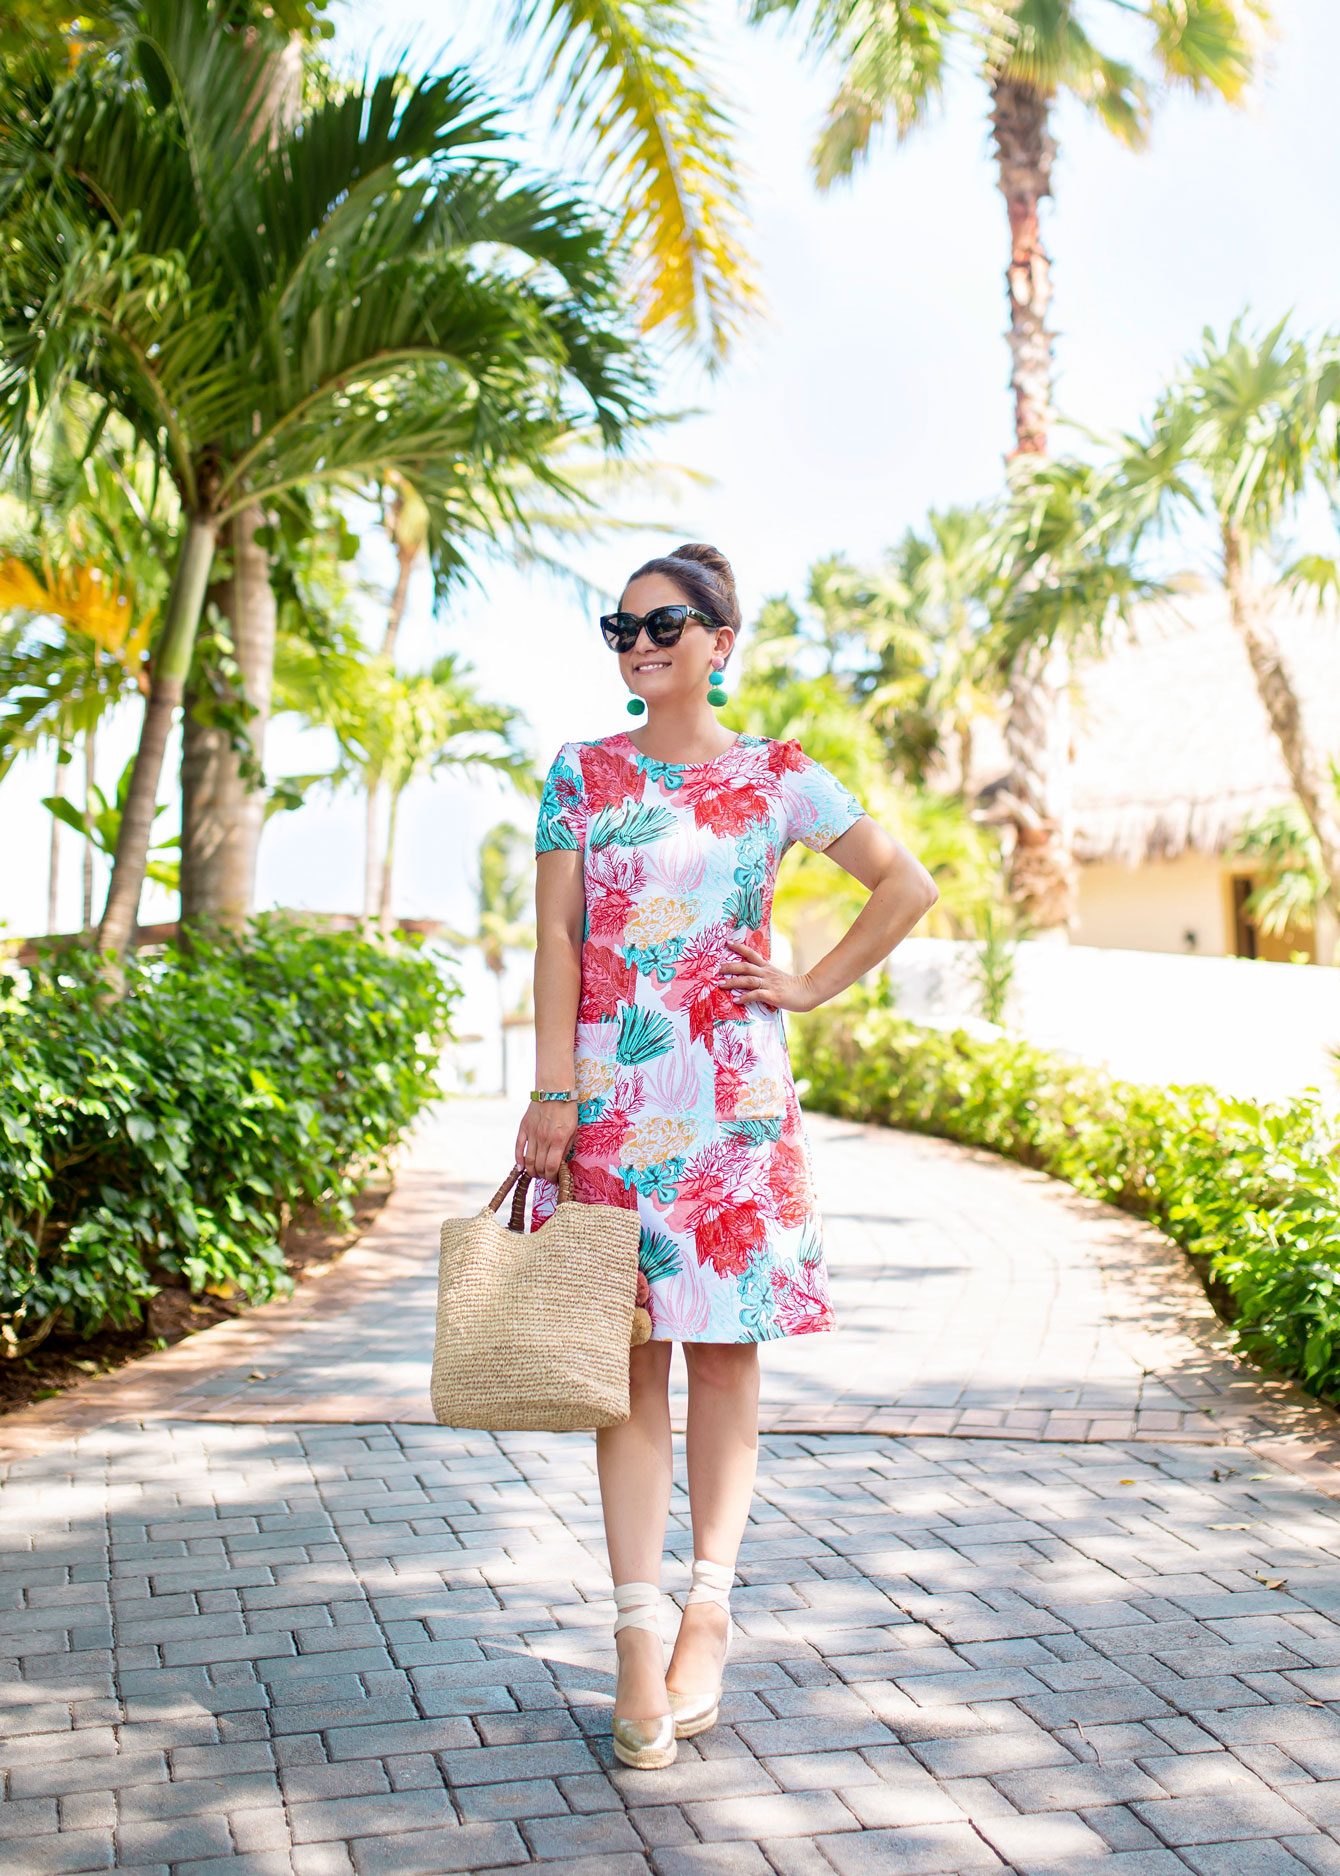 Persifor Carter Dress | Printed Shift Dress Preppy Style